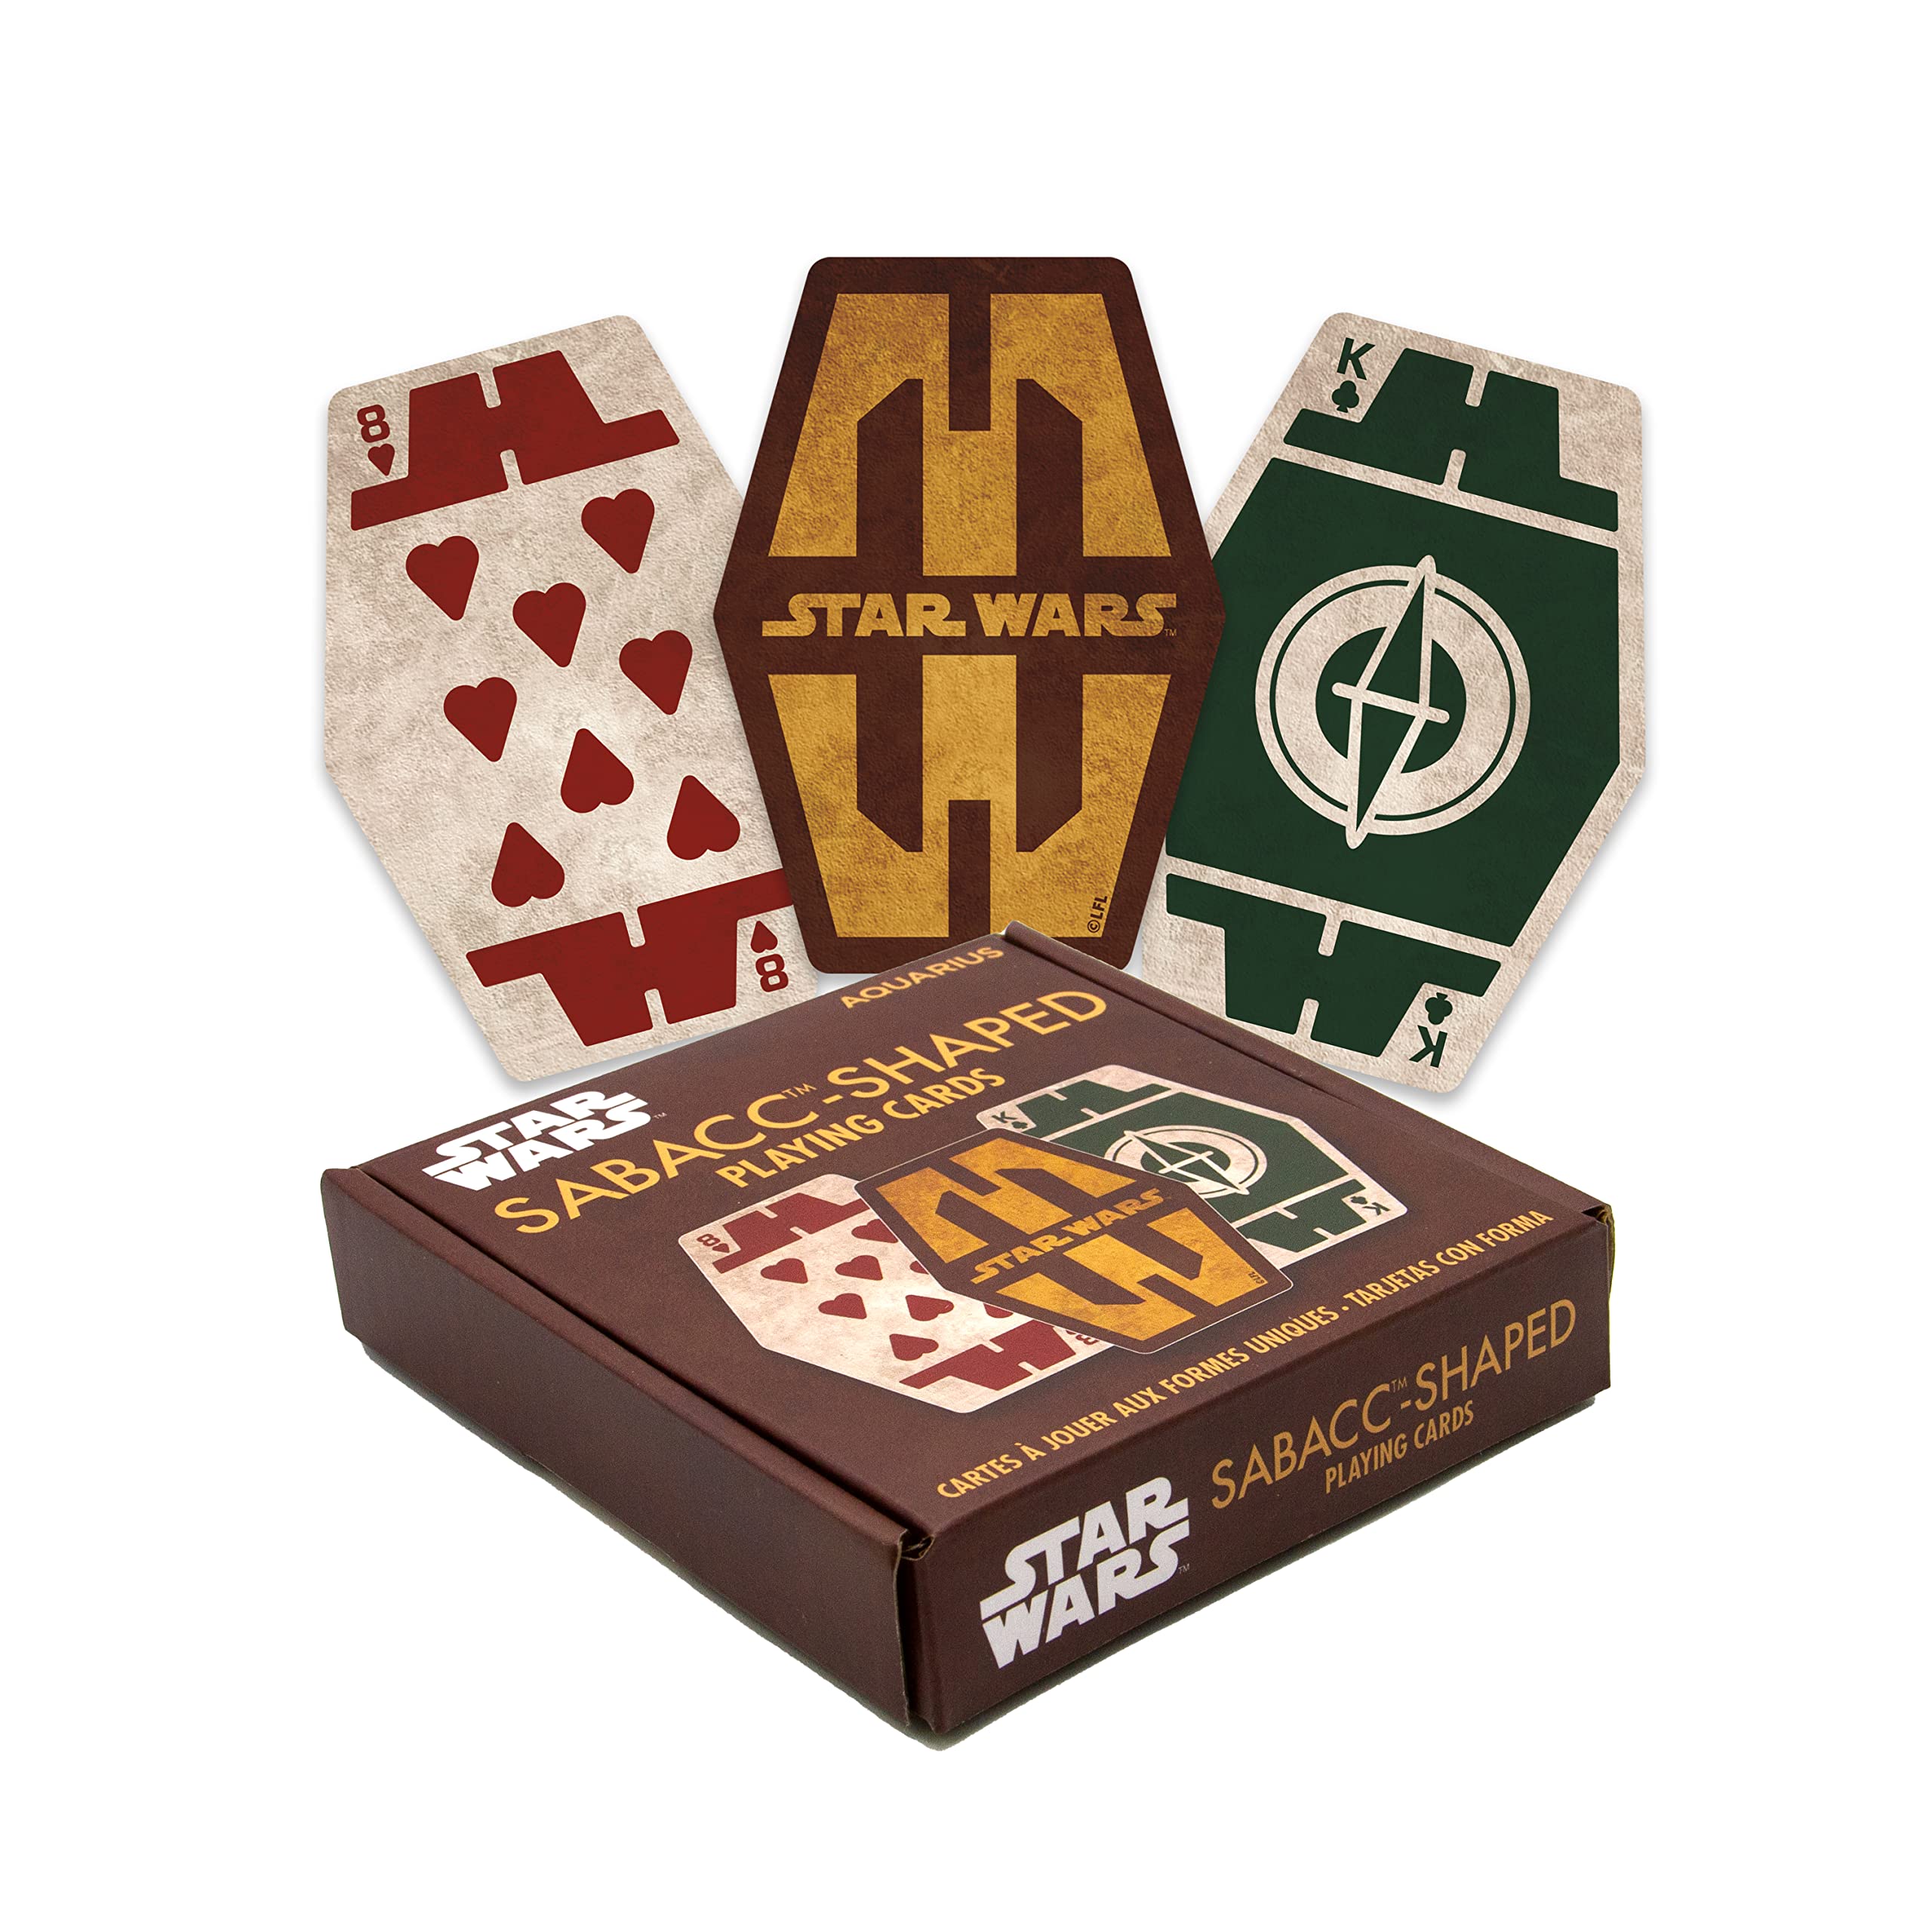 AQUARIUS Star Wars Playing Cards - Star Wars Sabacc Shaped Deck of Cards for Your Favorite Card Games - Officially Licensed Star Wars Merchandise & Collectibles